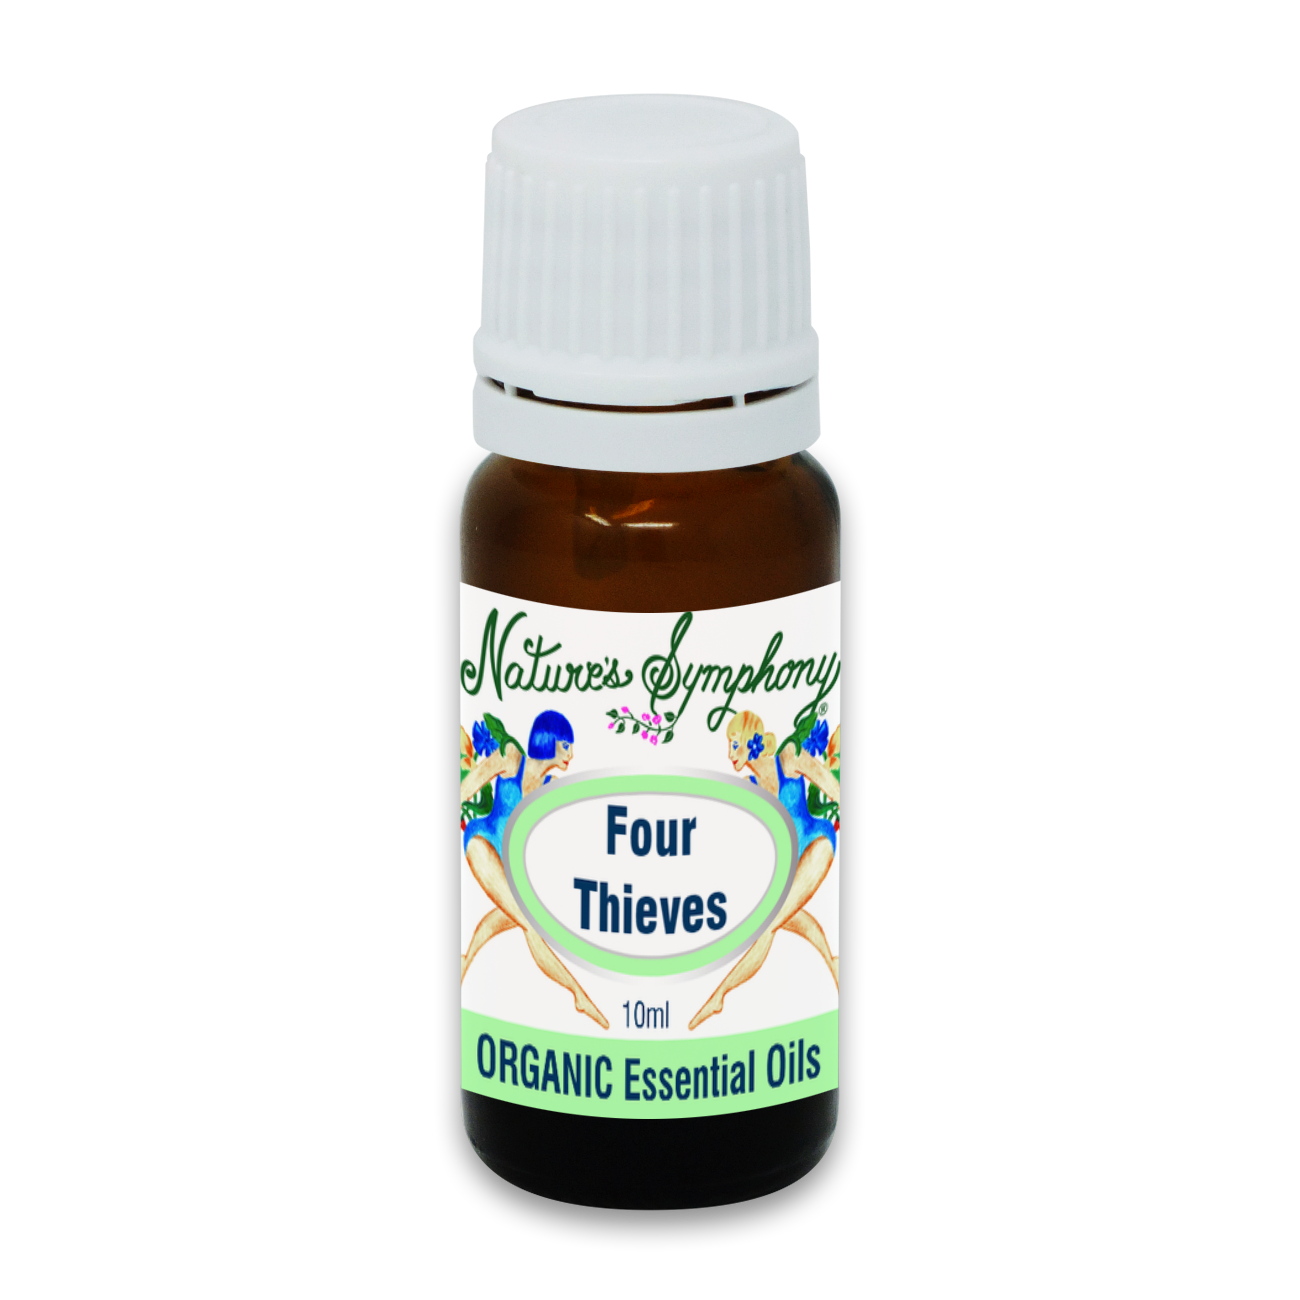 Four Thieves, Organic/Wildcrafted blend - 10ml